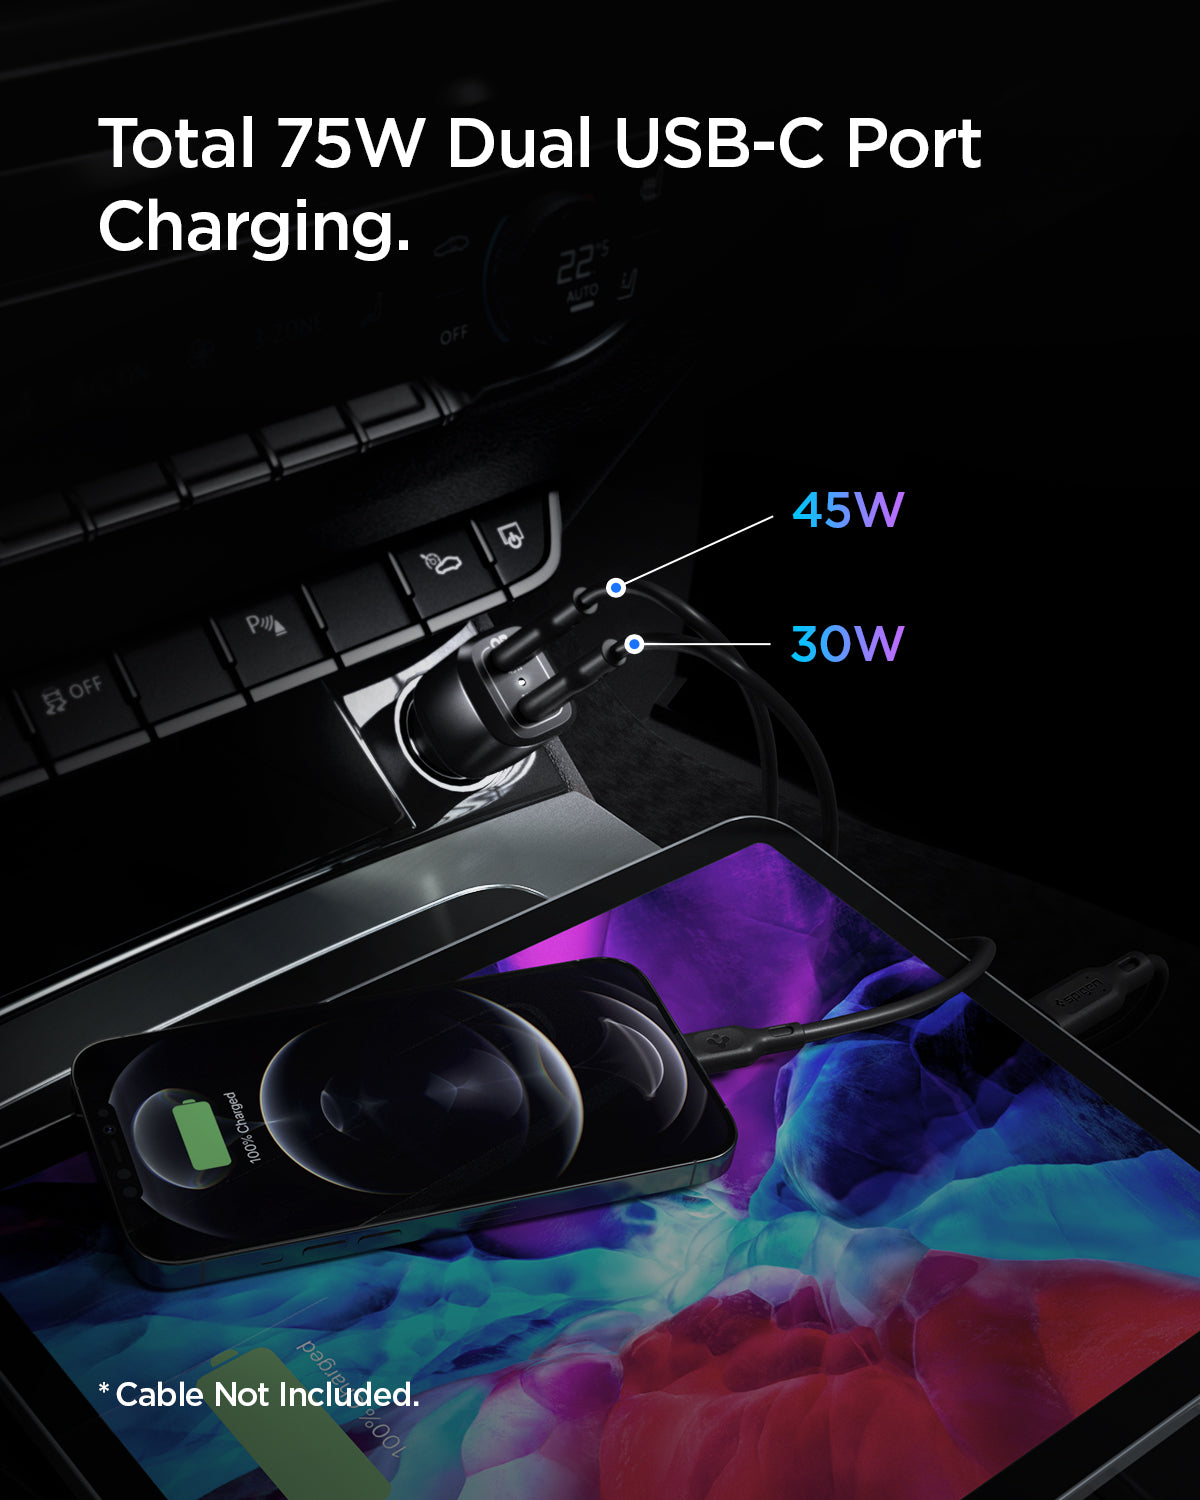 ACP04581 - ArcStation™ Dual Port Car Charger PC2200 in Black showing the Total 75W Dual USB-C Port Charging. Attached to a car charger with 45W and 30W power charging 2 different devices